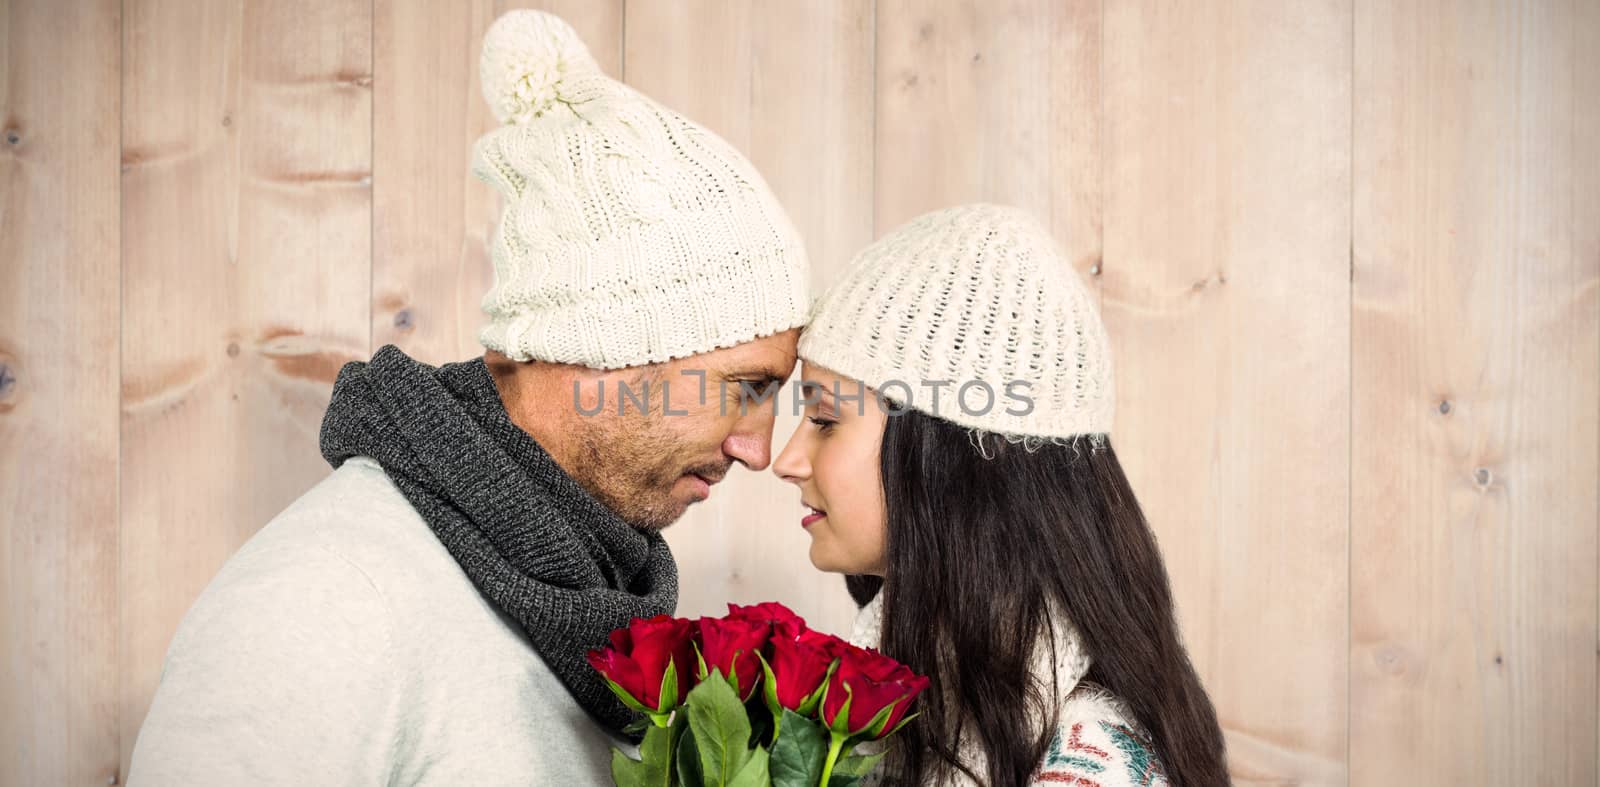 Smiling couple nose-to-nose holding roses bouquet against wooden planks